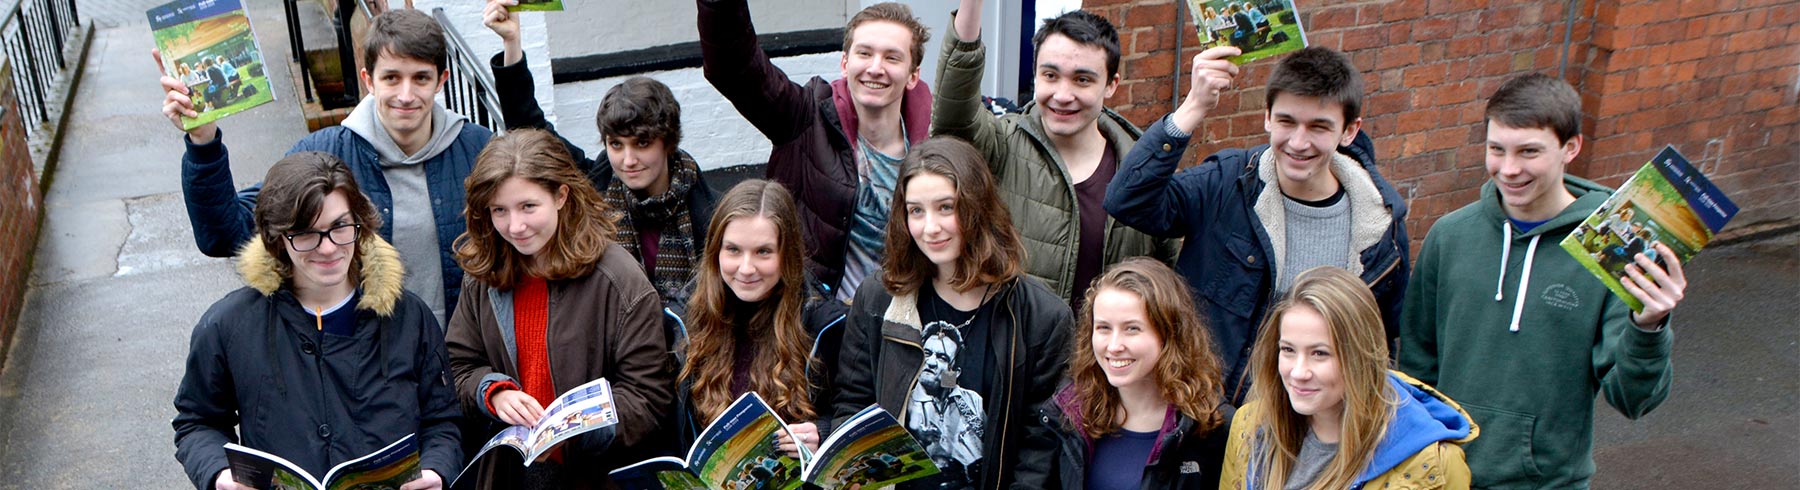 A group of students holding prospectuses